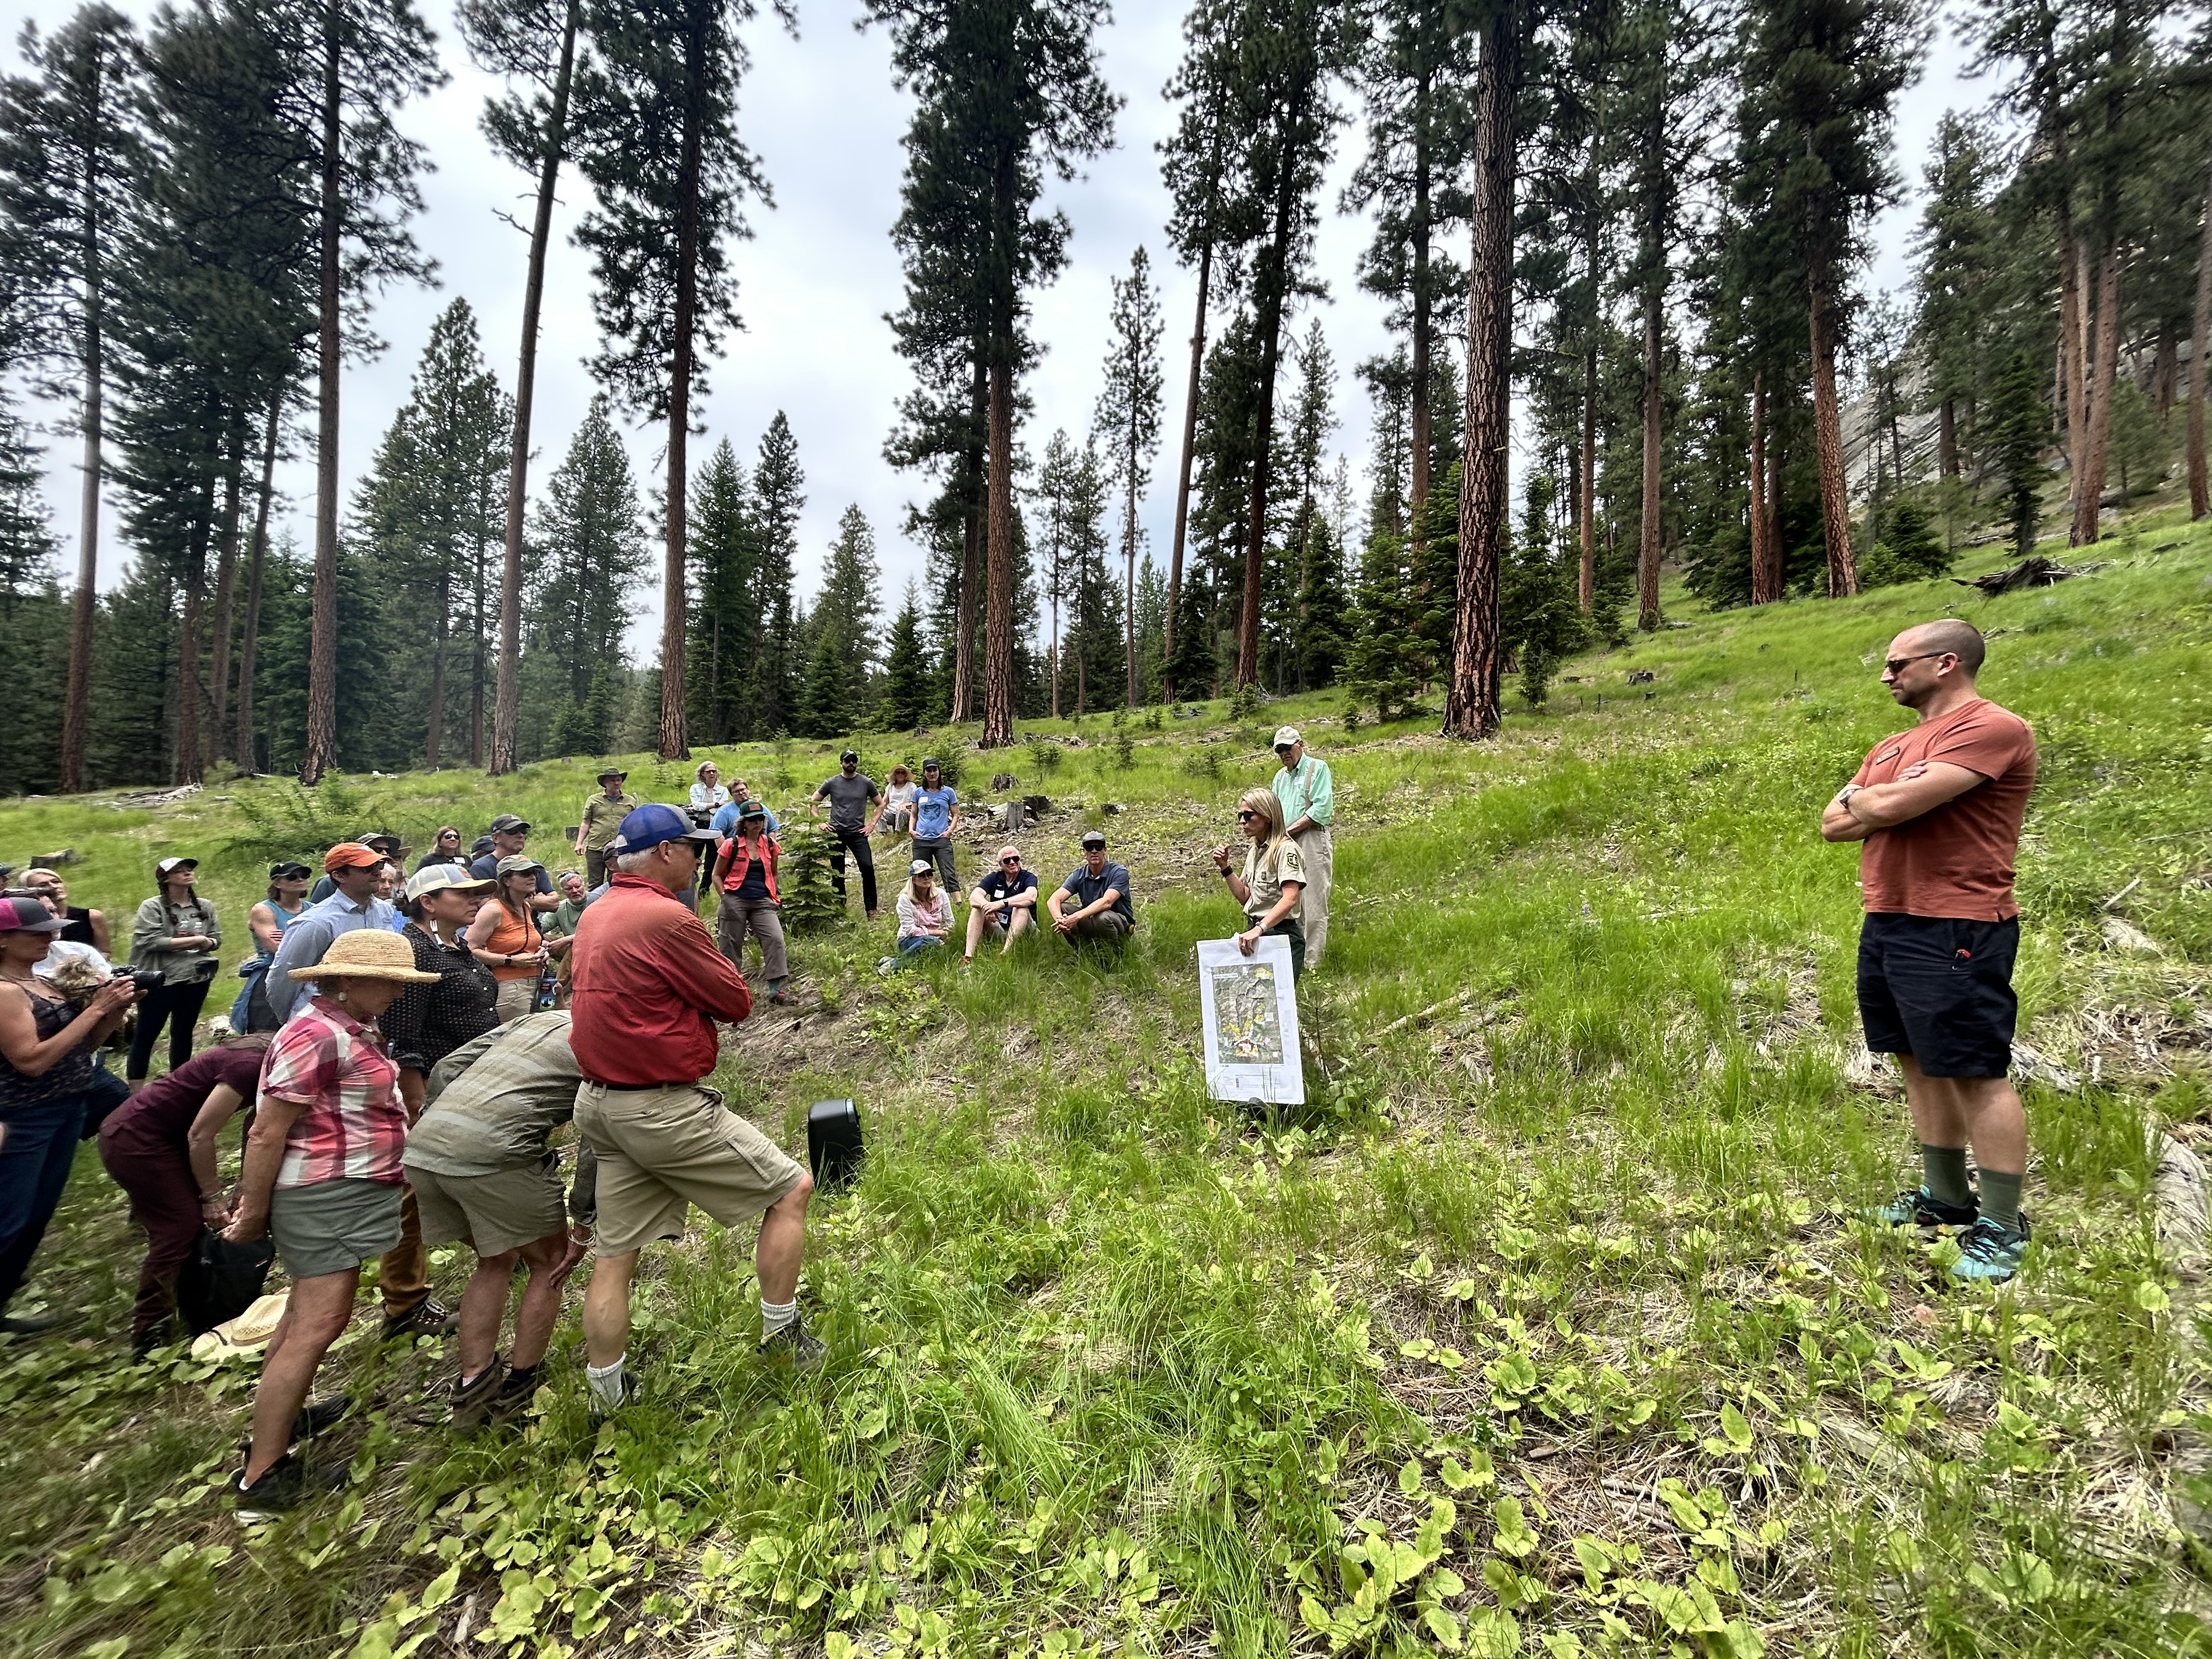 Board members listen to a Forest Service presenter in a forested area